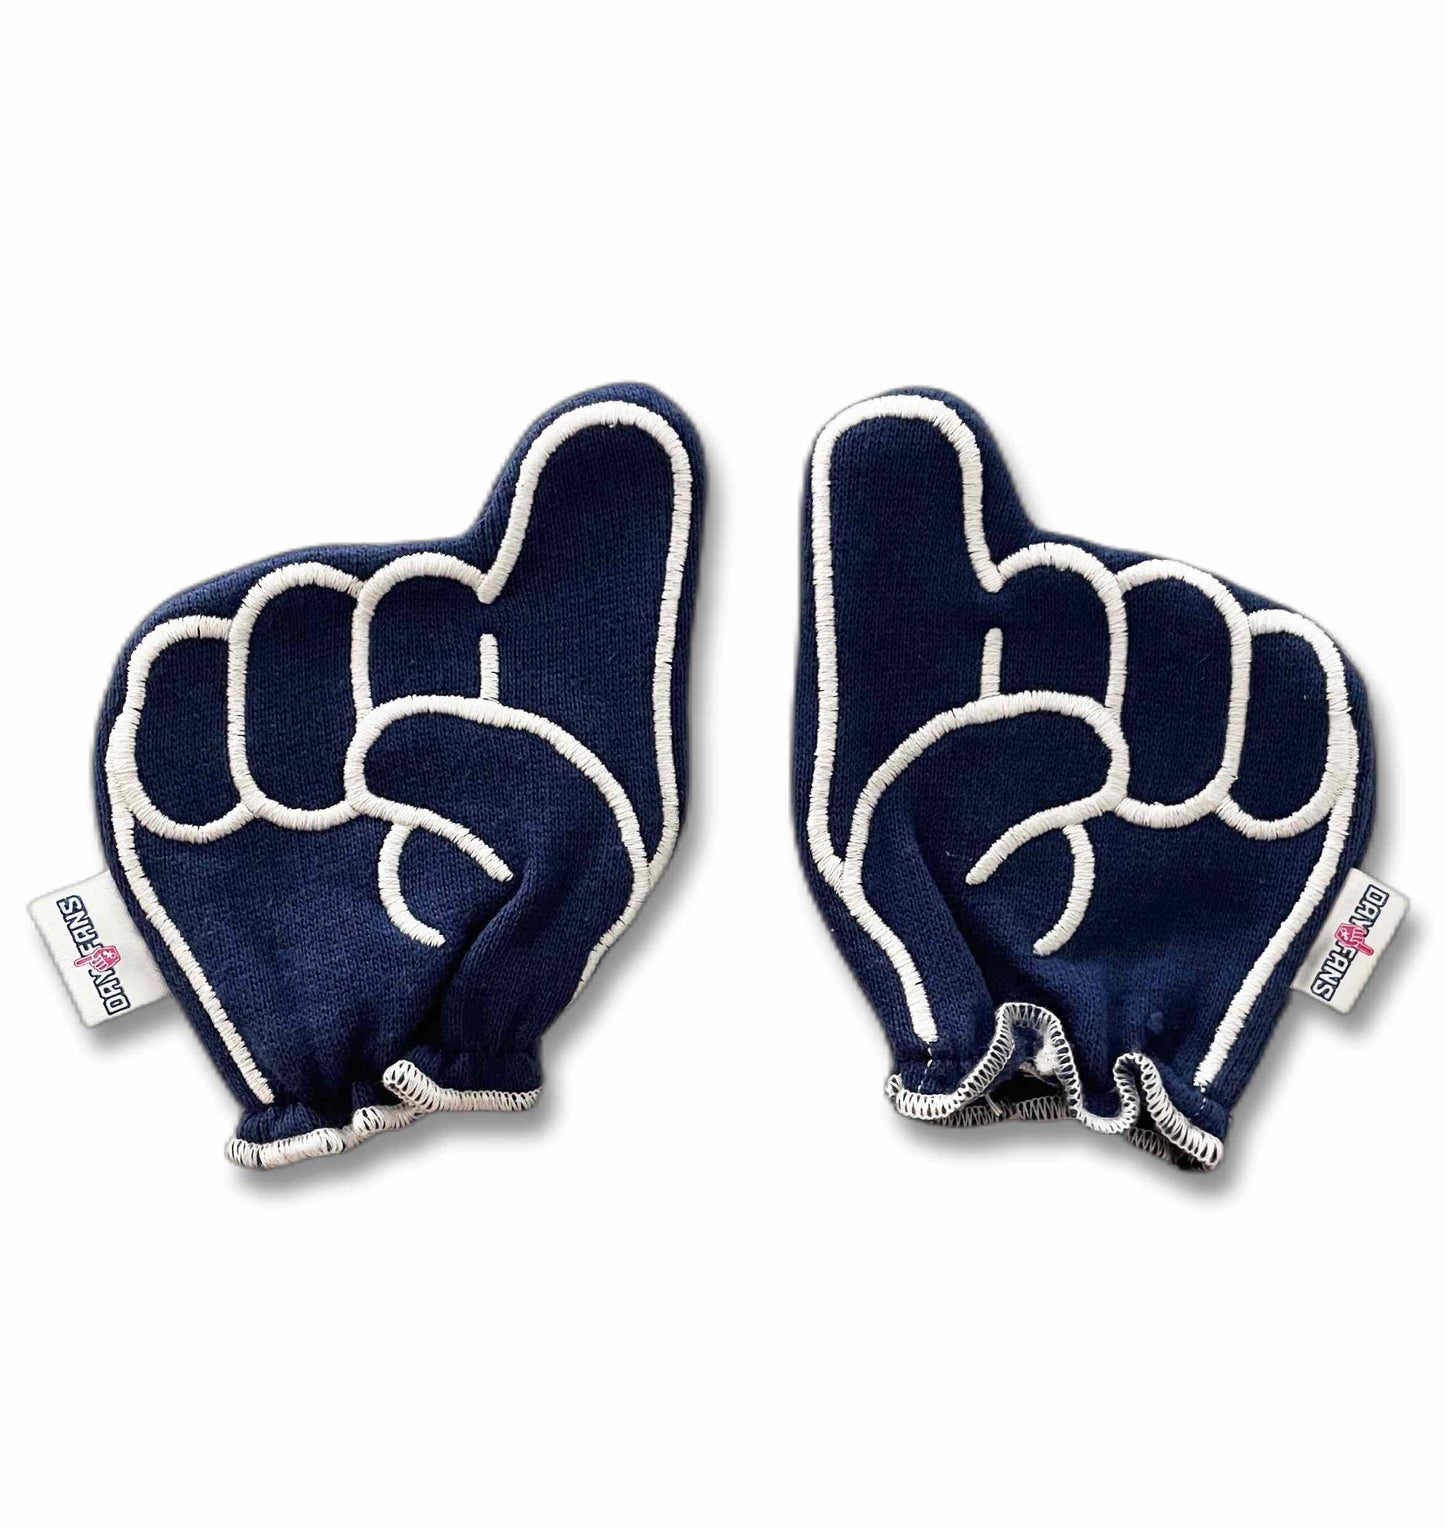 Penn State We Are FanMitts Baby Mittens Blue Front Pair